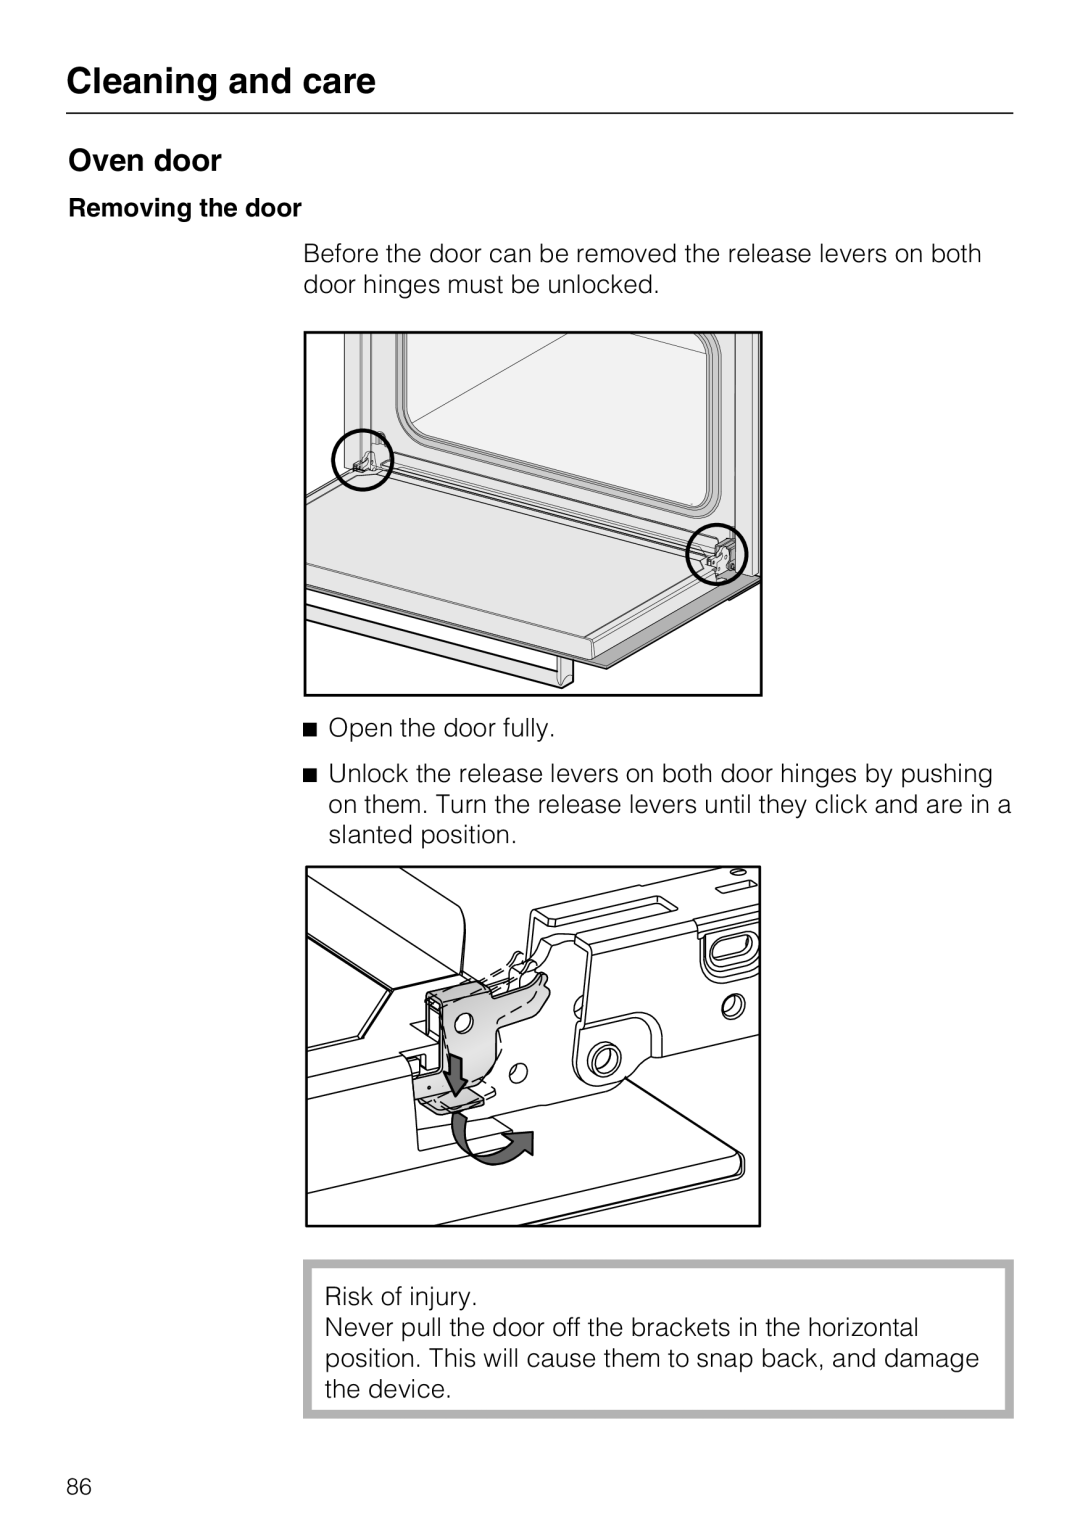 Miele 09 800 830 installation instructions Oven door, Cleaning and care, Removing the door 